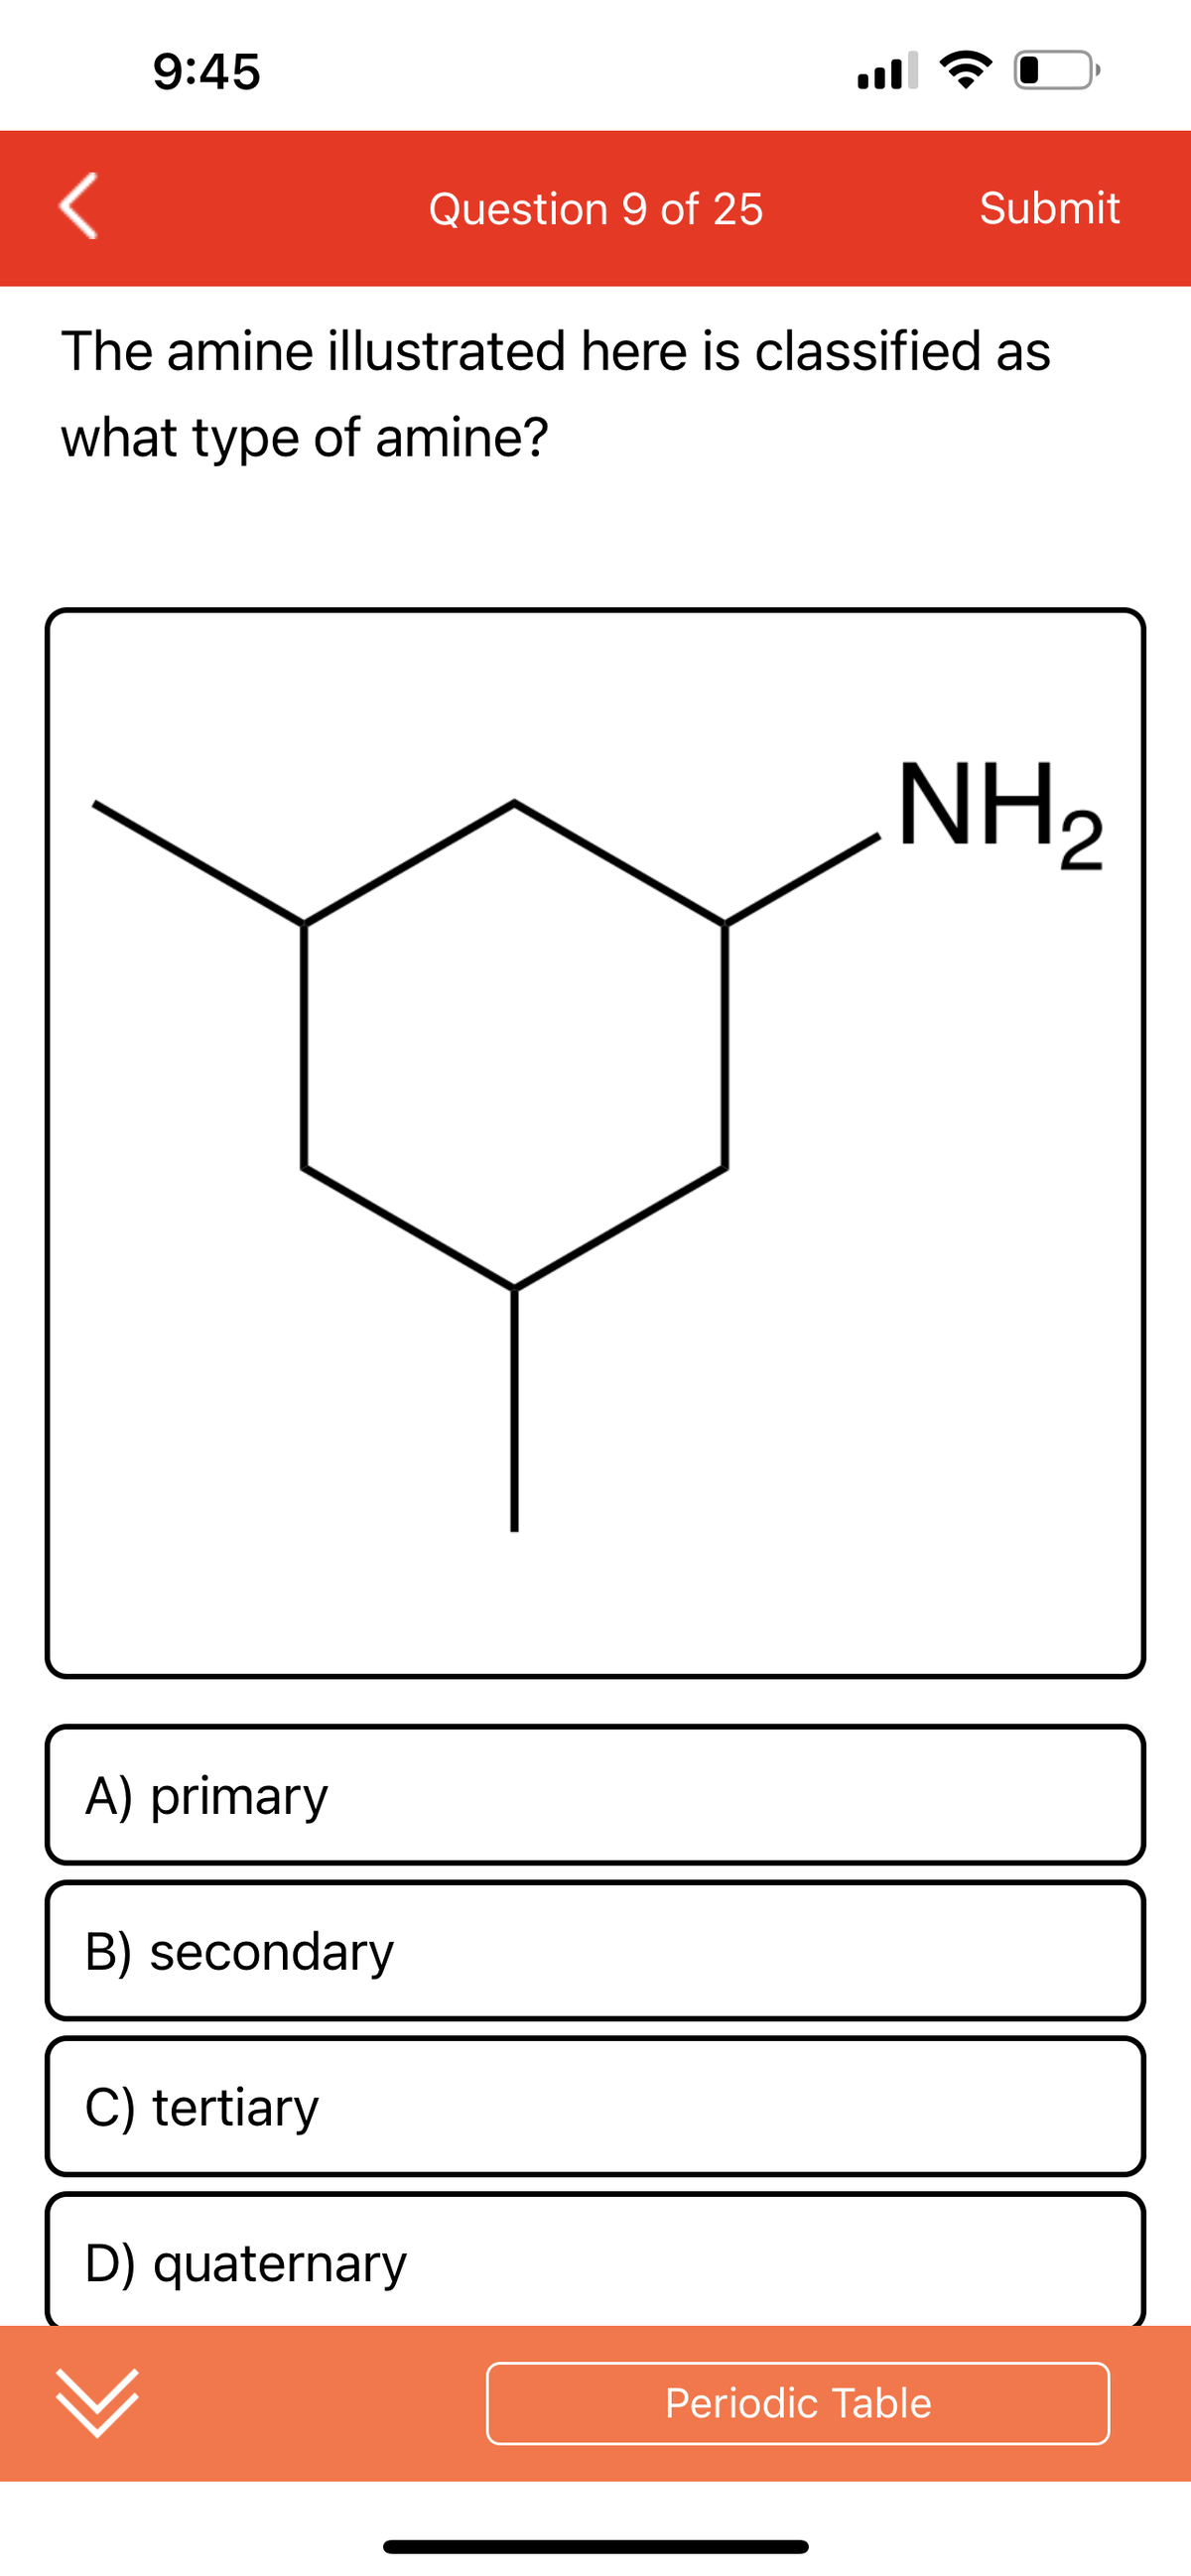 9:45
A) primary
The amine illustrated here is classified as
what type of amine?
B) secondary
C) tertiary
Question 9 of 25
D) quaternary
Submit
NH₂
Periodic Table